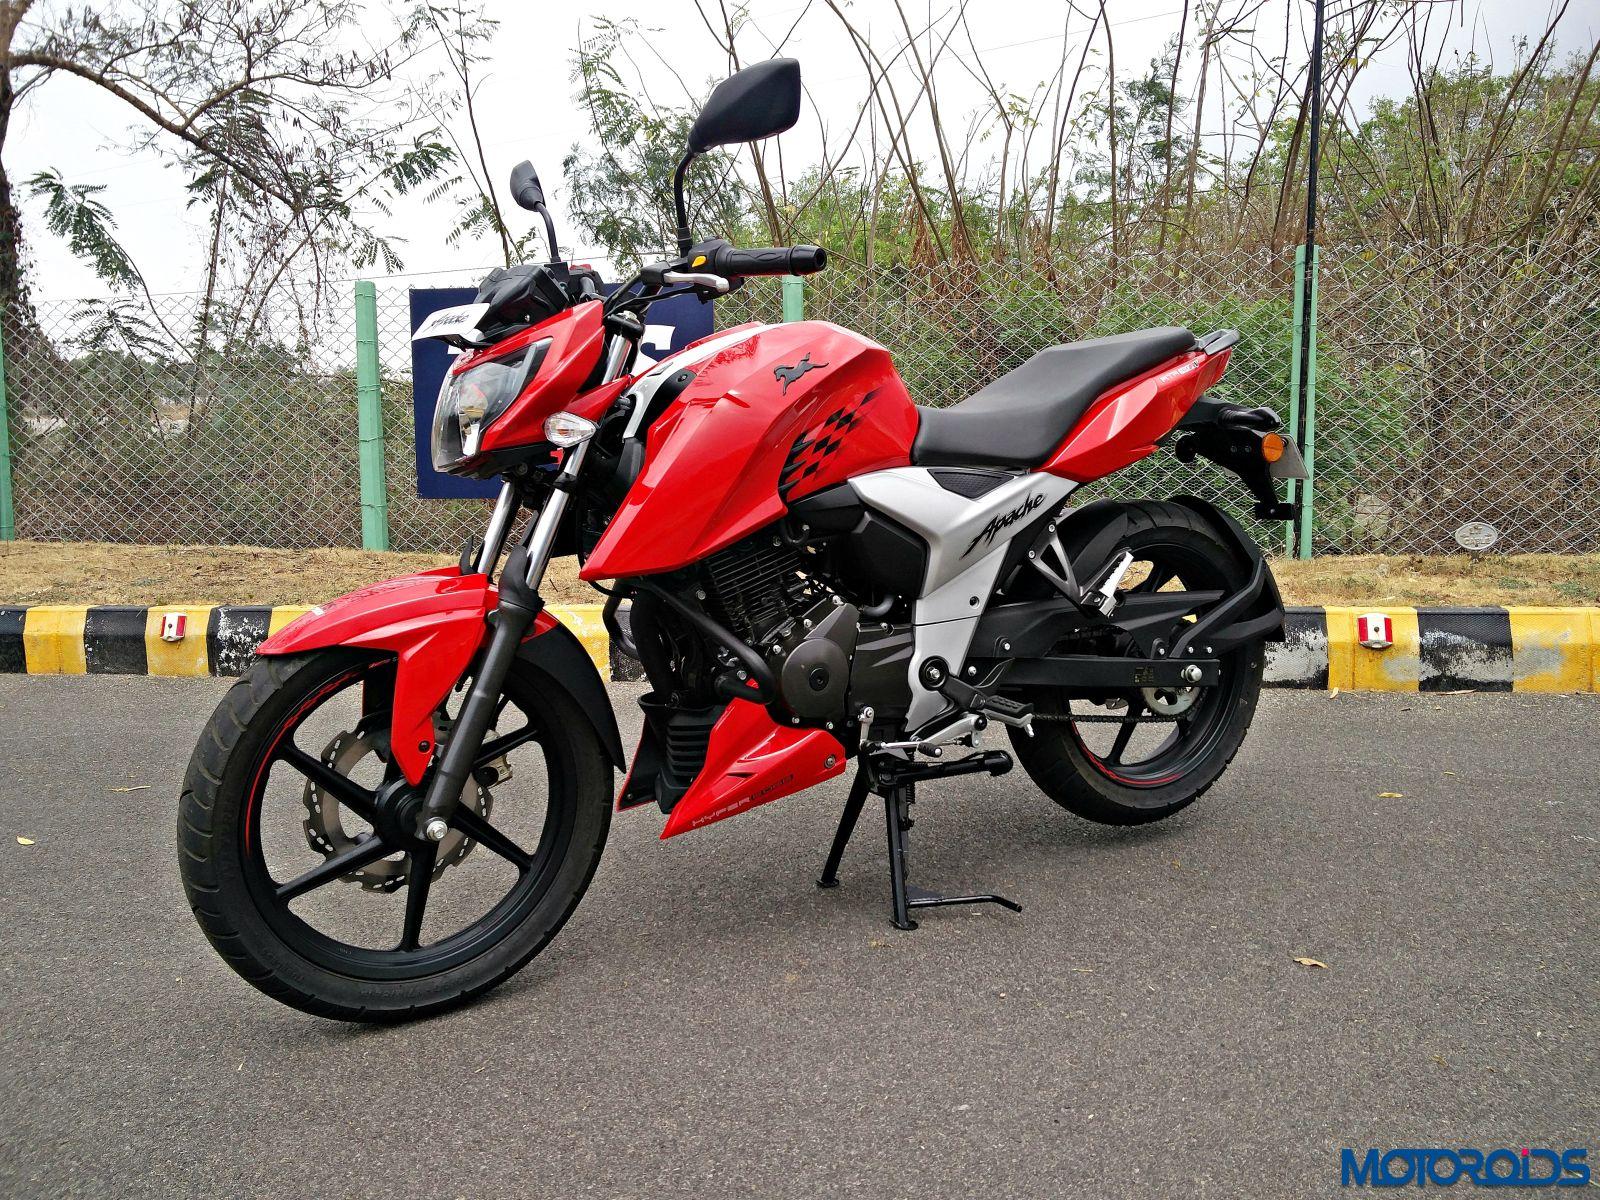 After Conquering India, Where Is the TVS Apache RTR 160 4V